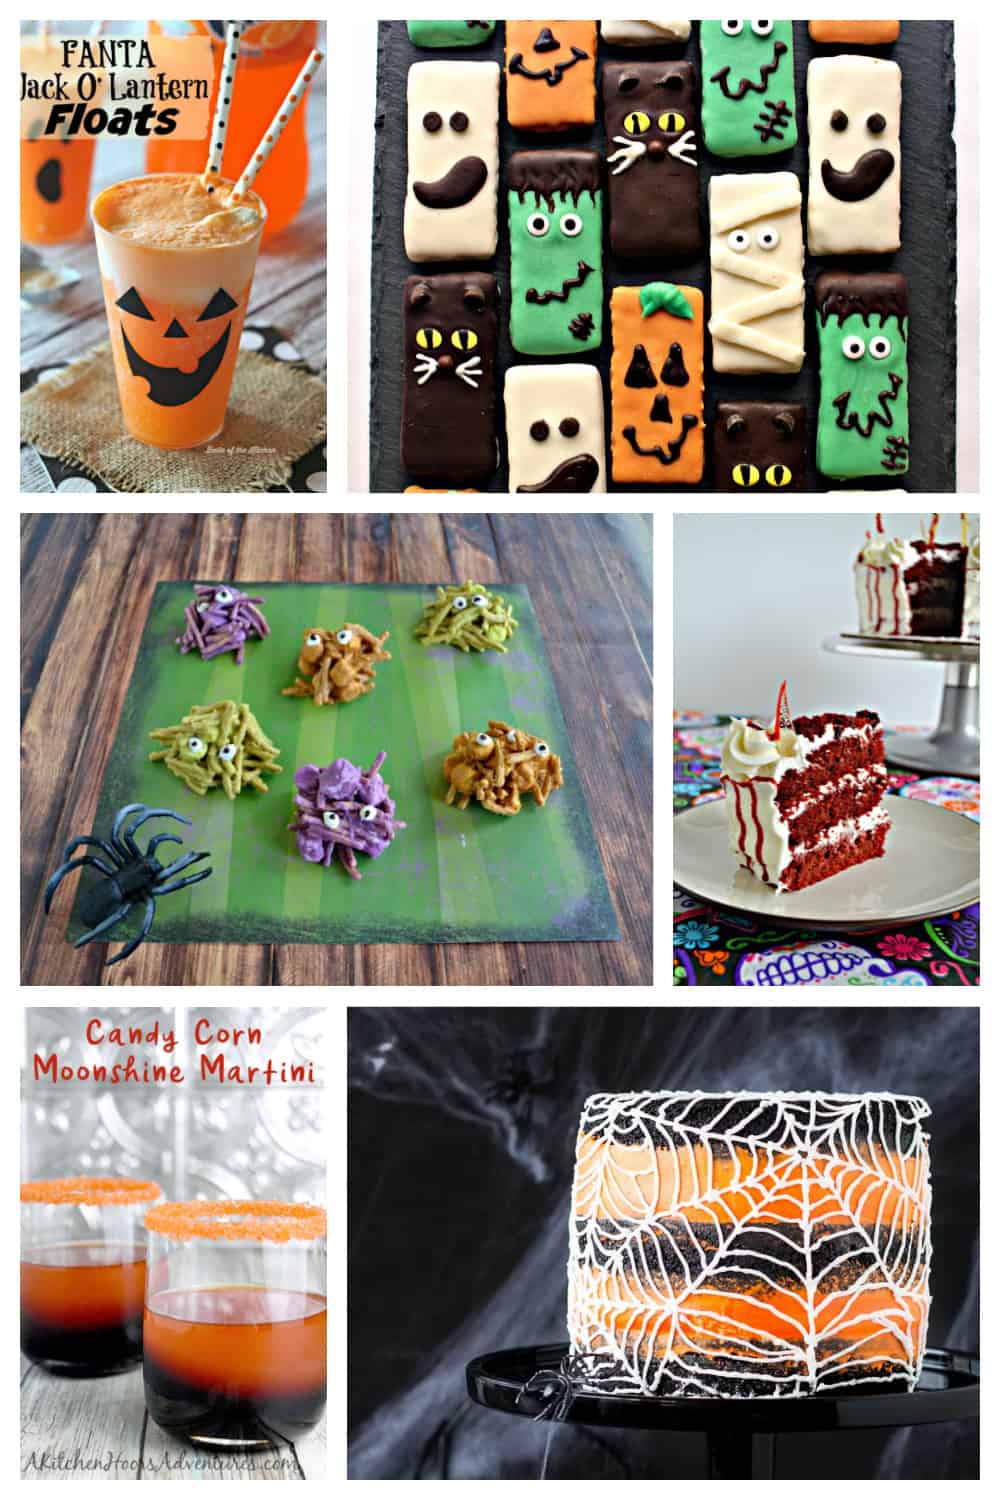 25 Sweet and Savory Recipes for Halloween